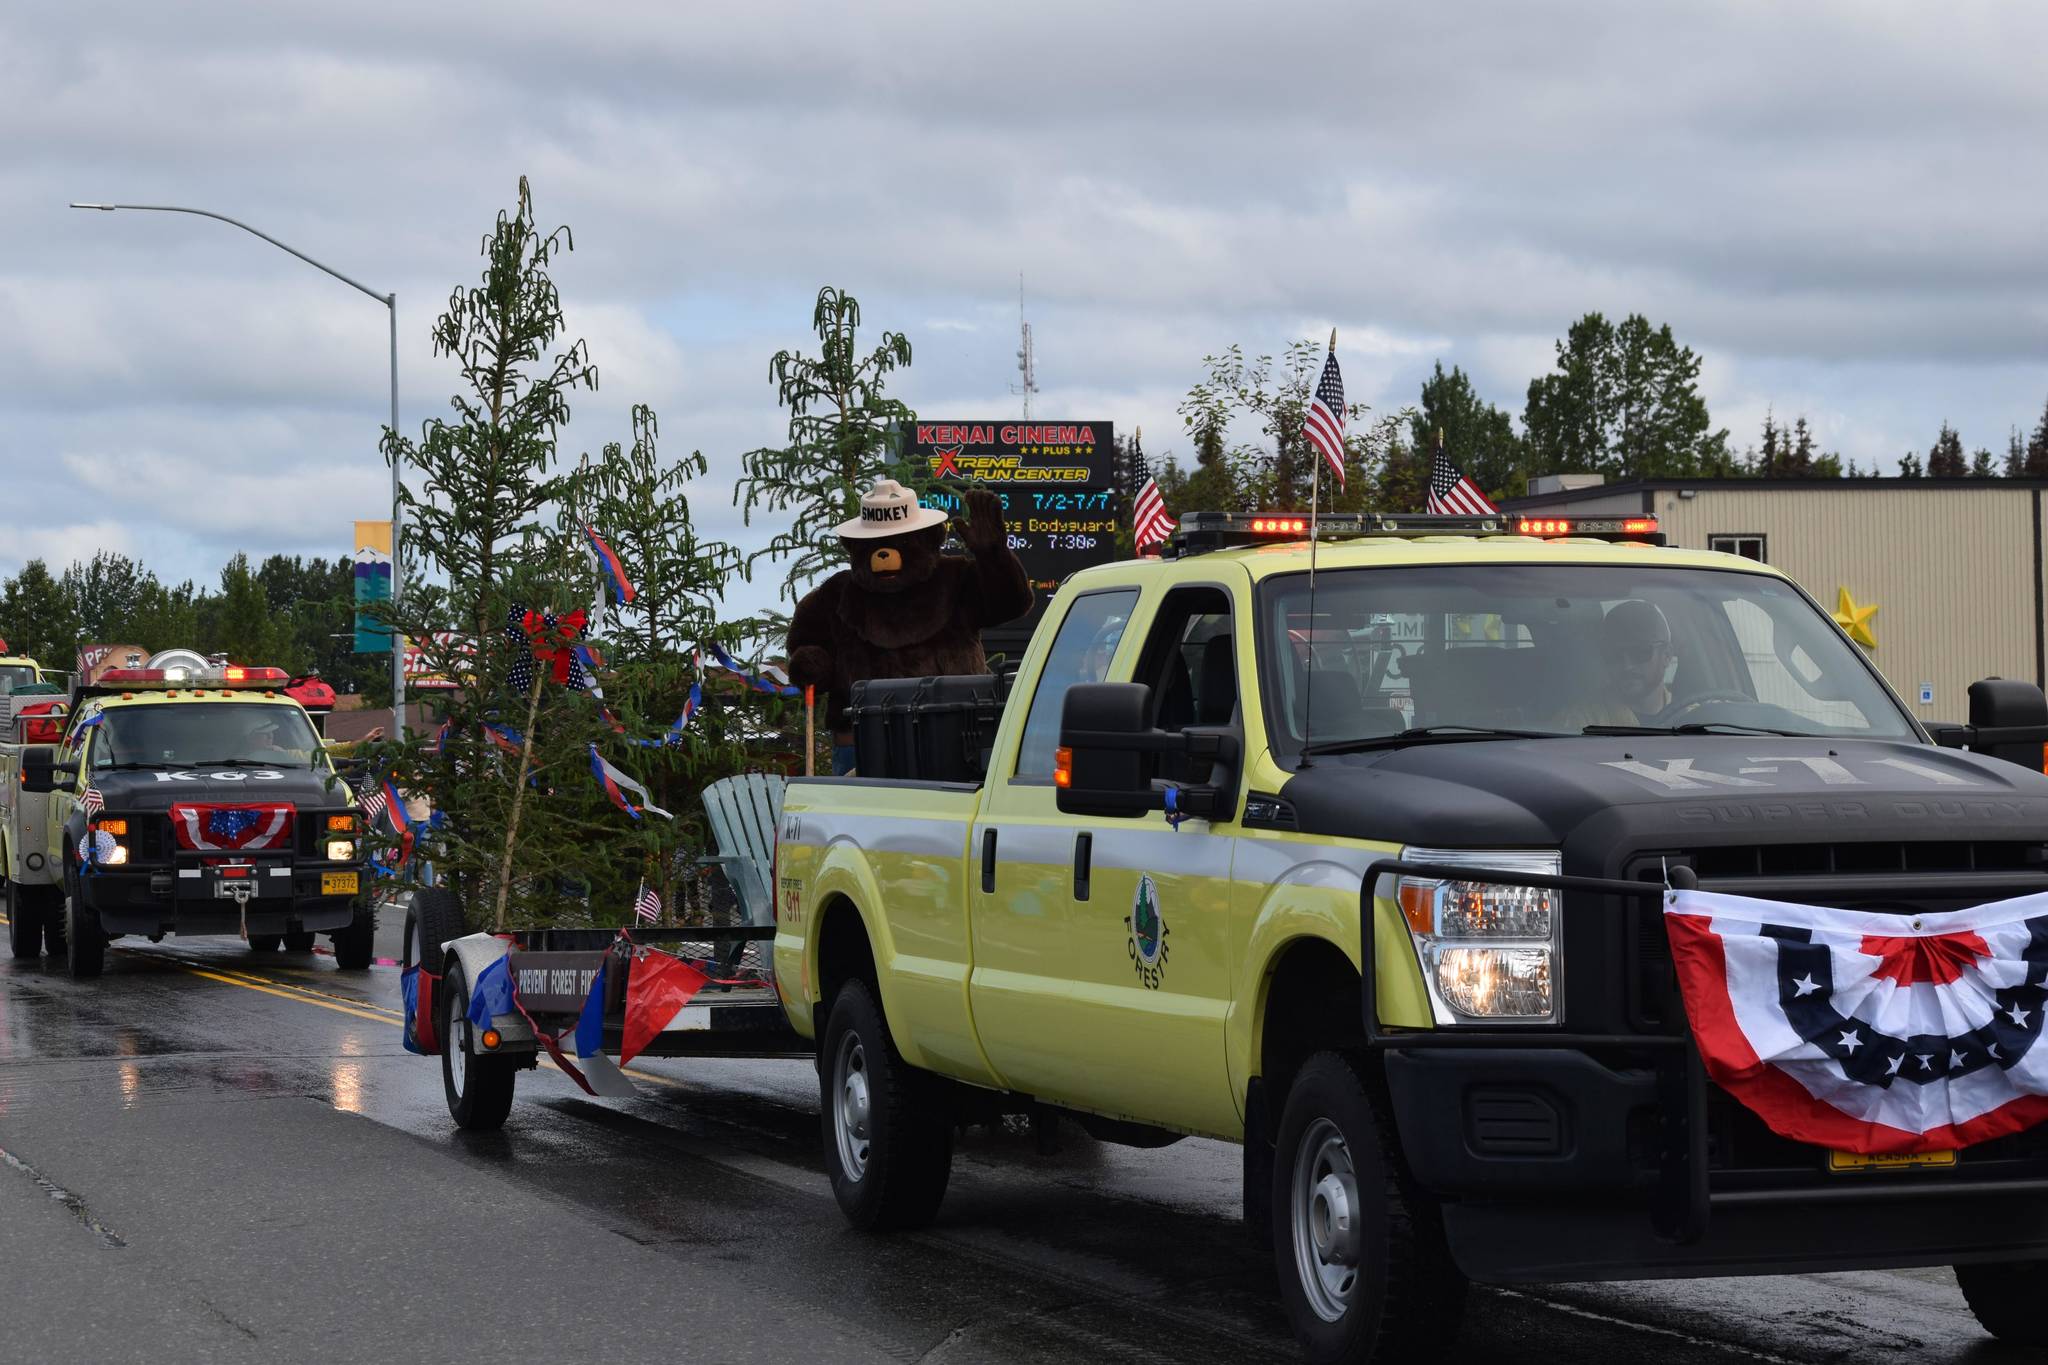 Smokey the Bear waves to the crowd during Kenai’s annual Independence Day parade on July 4, 2021. (Camille Botello / Peninsula Clarion)